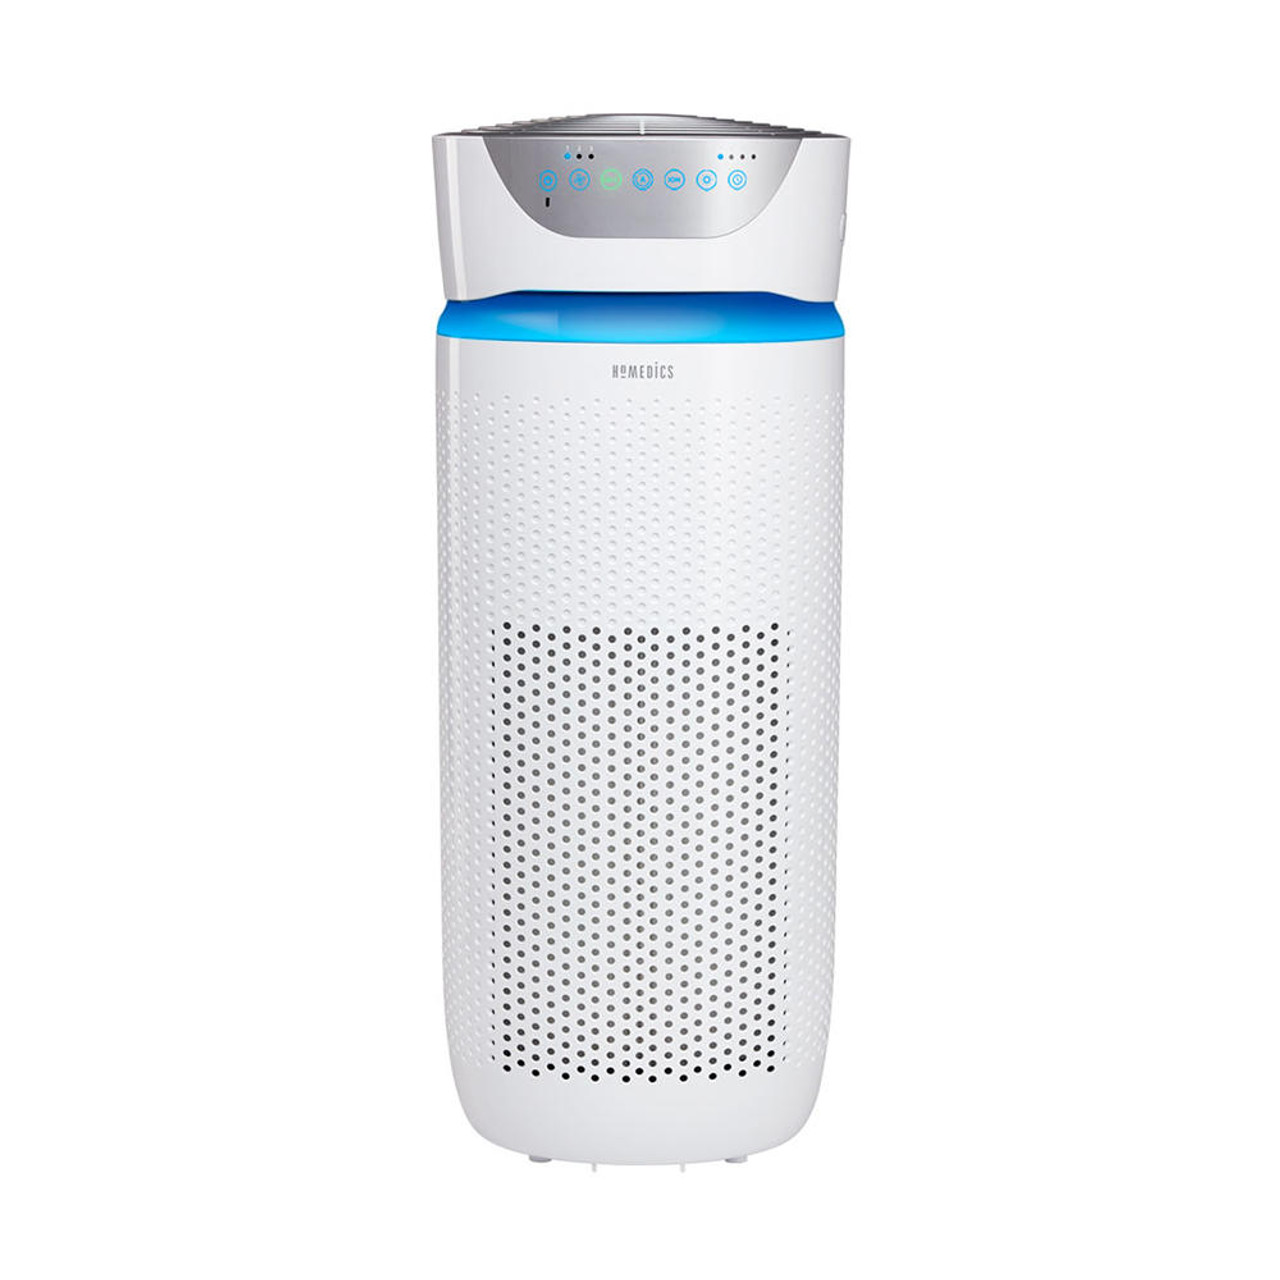 Are UV air purifiers worth it?